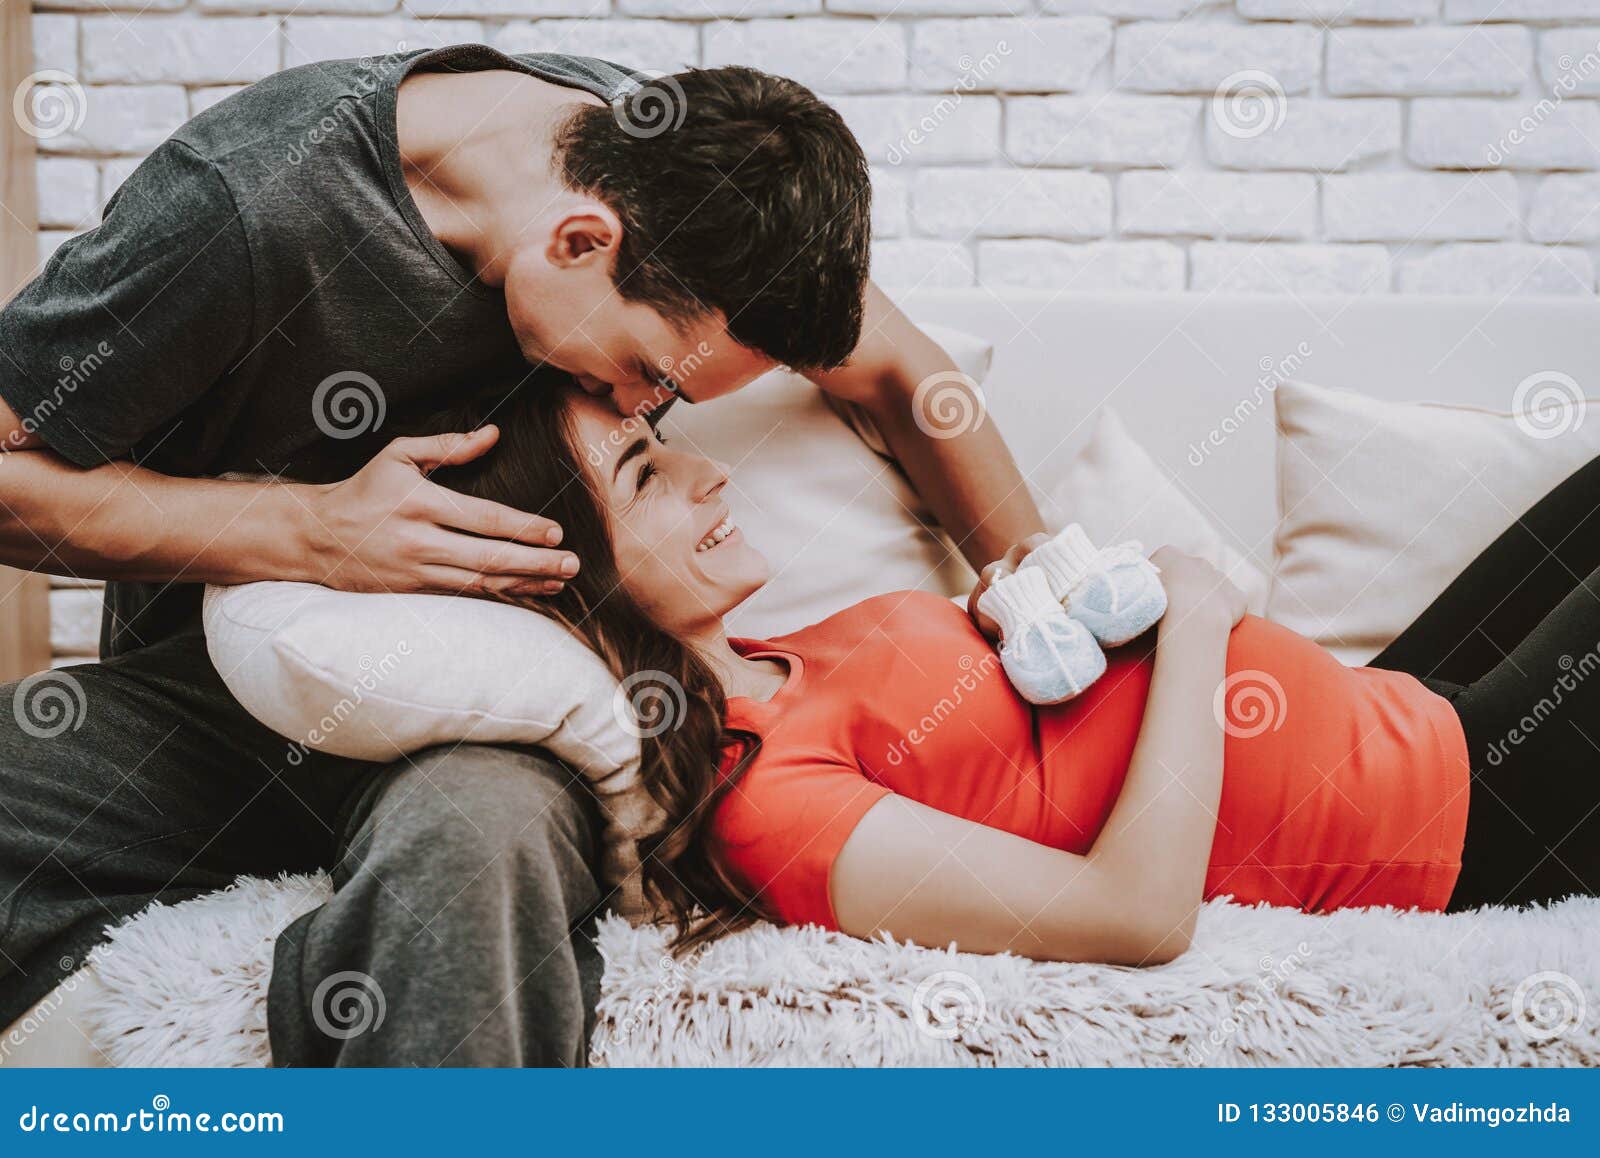 Husband and Pregnant Wife Relaxing on Couch Stock Photo photo